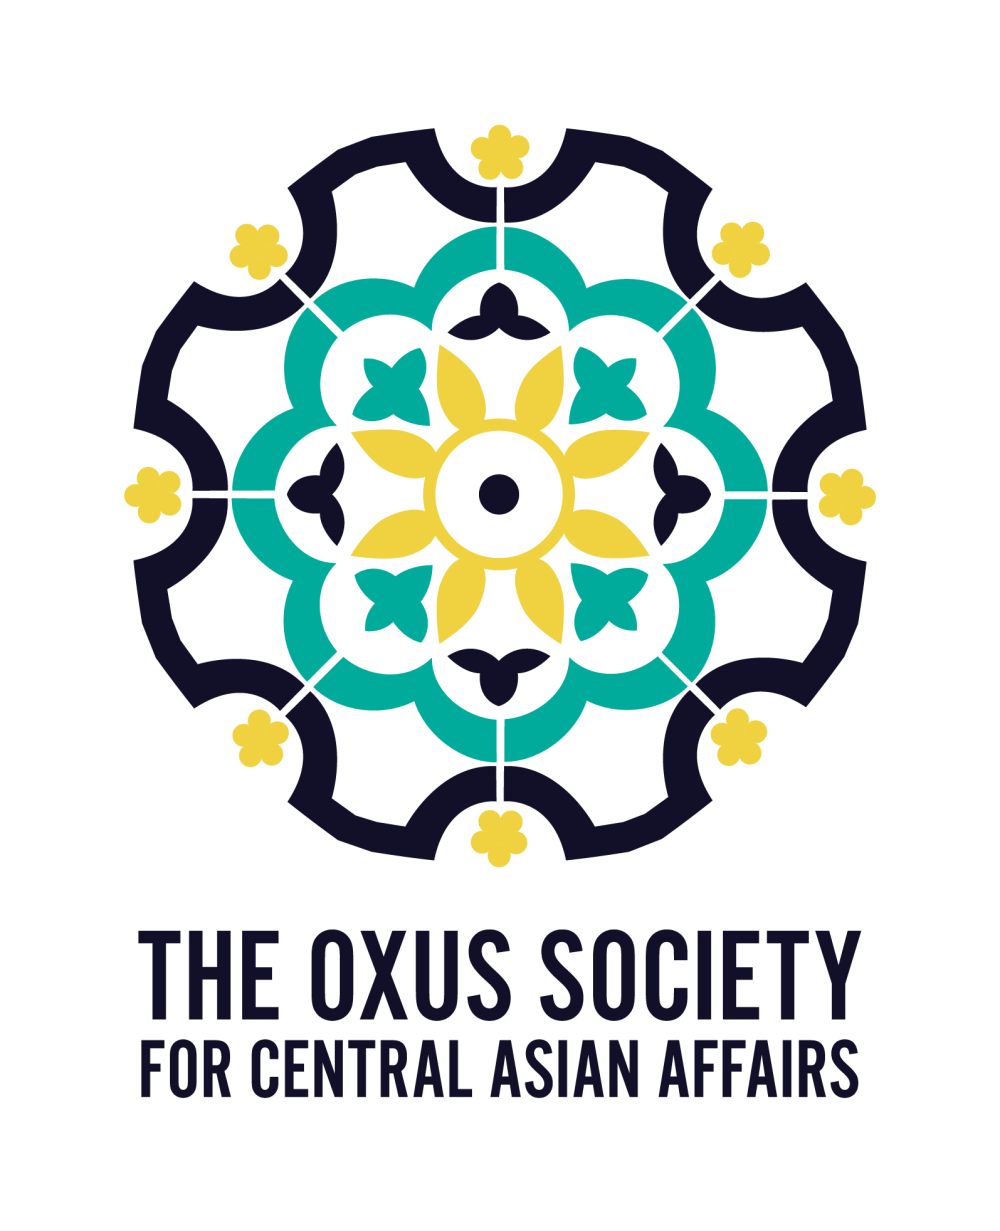 Oxus Society for Central Asian Affairs